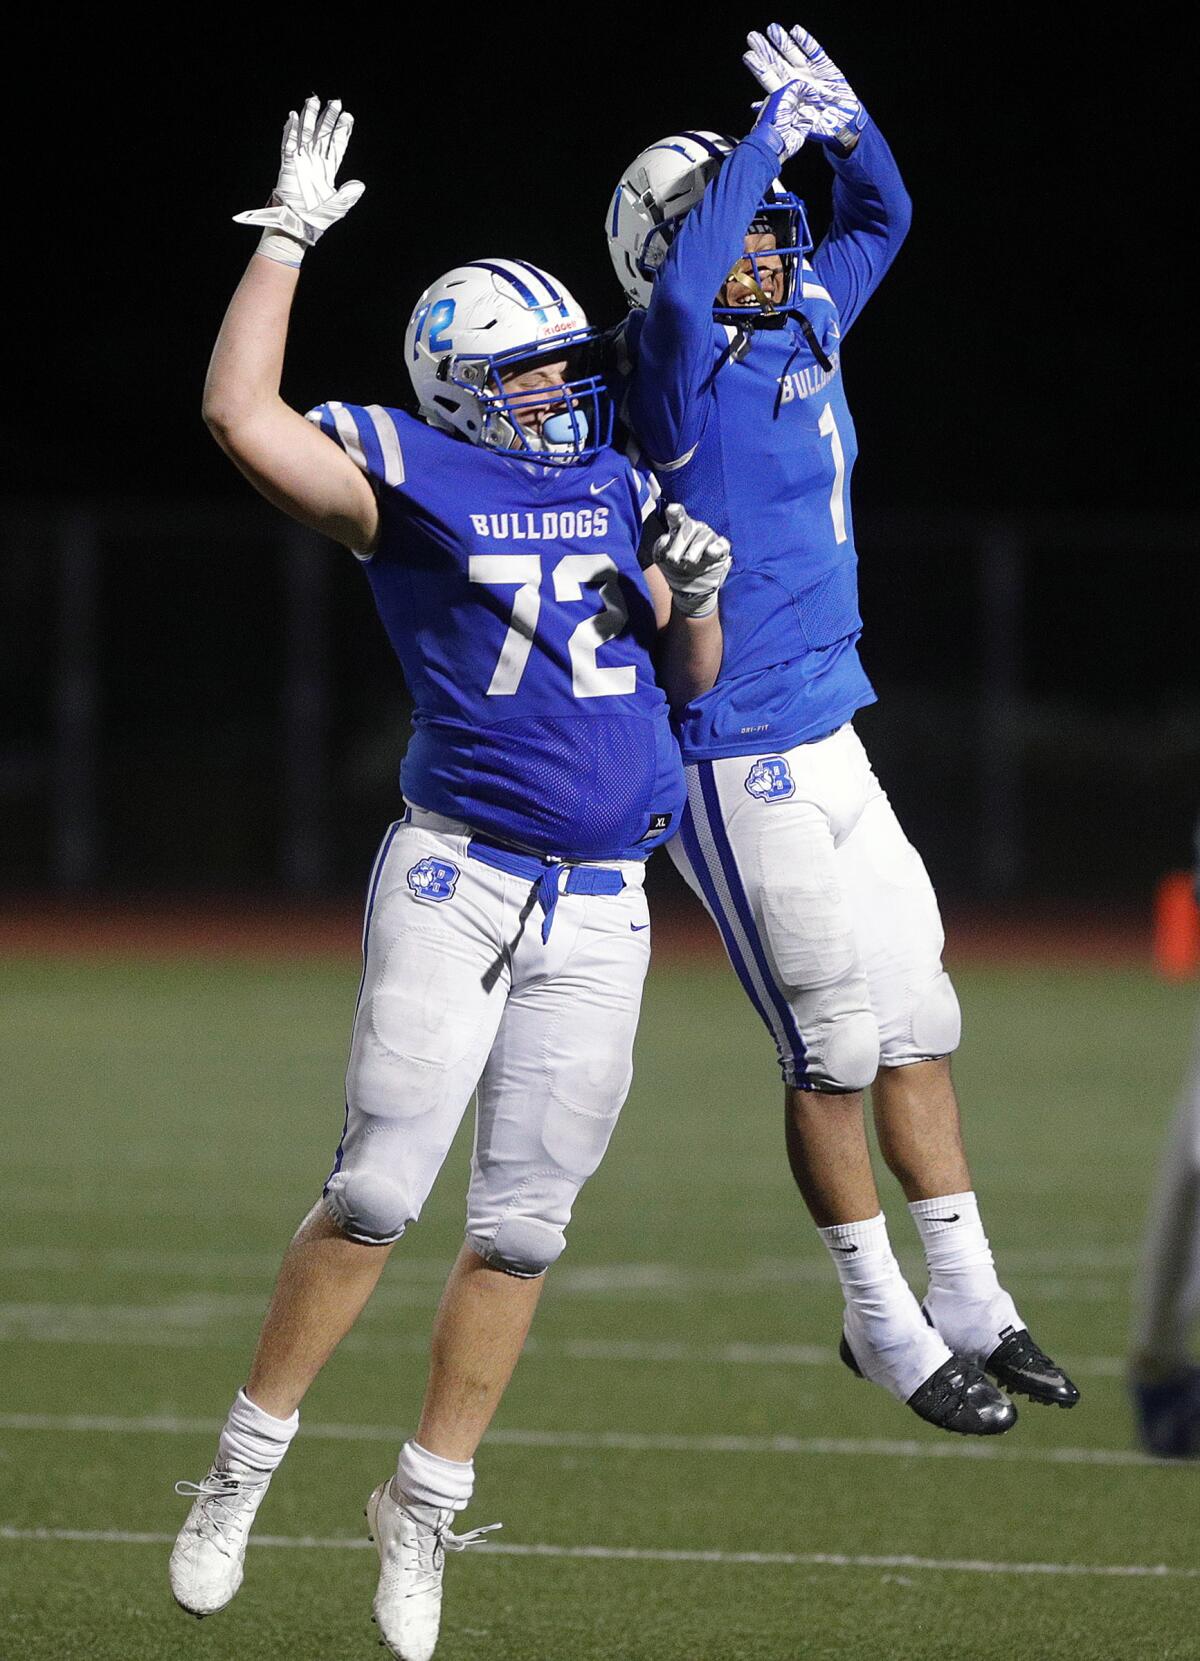 Burbank's Craig Rushton and Isaac Glover celebrate a sack that turns the ball over on downs from Pasadena in a Pacific League football game at Memorial Field in Burbank on Tuesday, September 26, 2019.